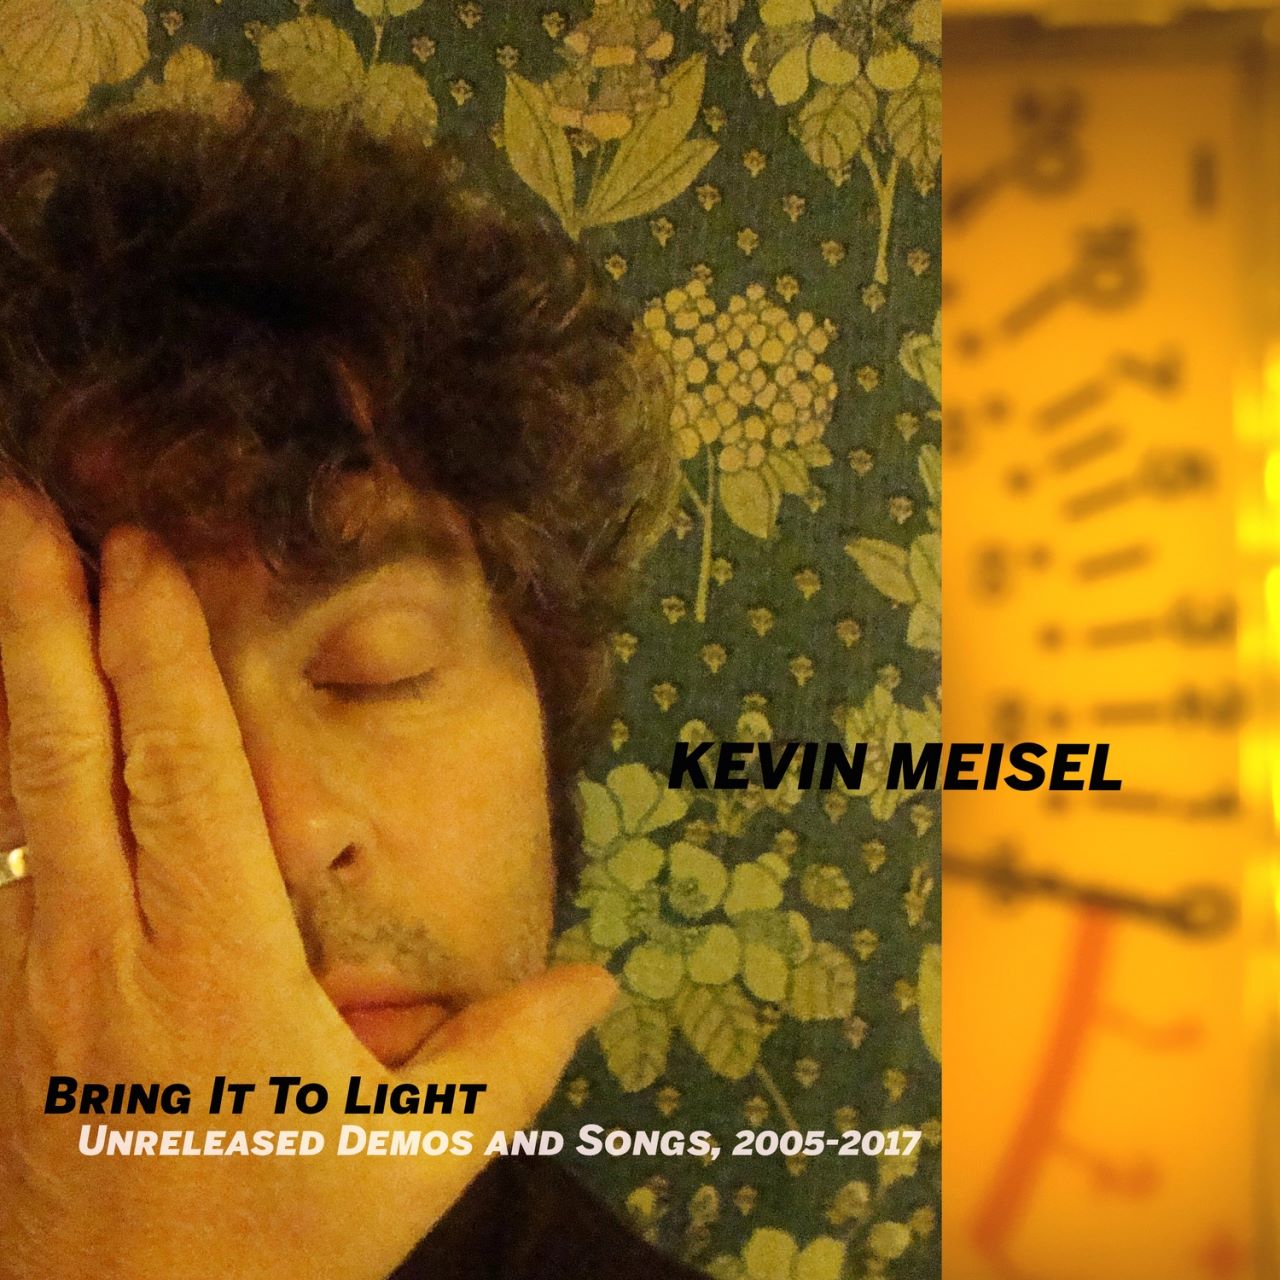 Kevin Meisel - Bring It To Light cover album